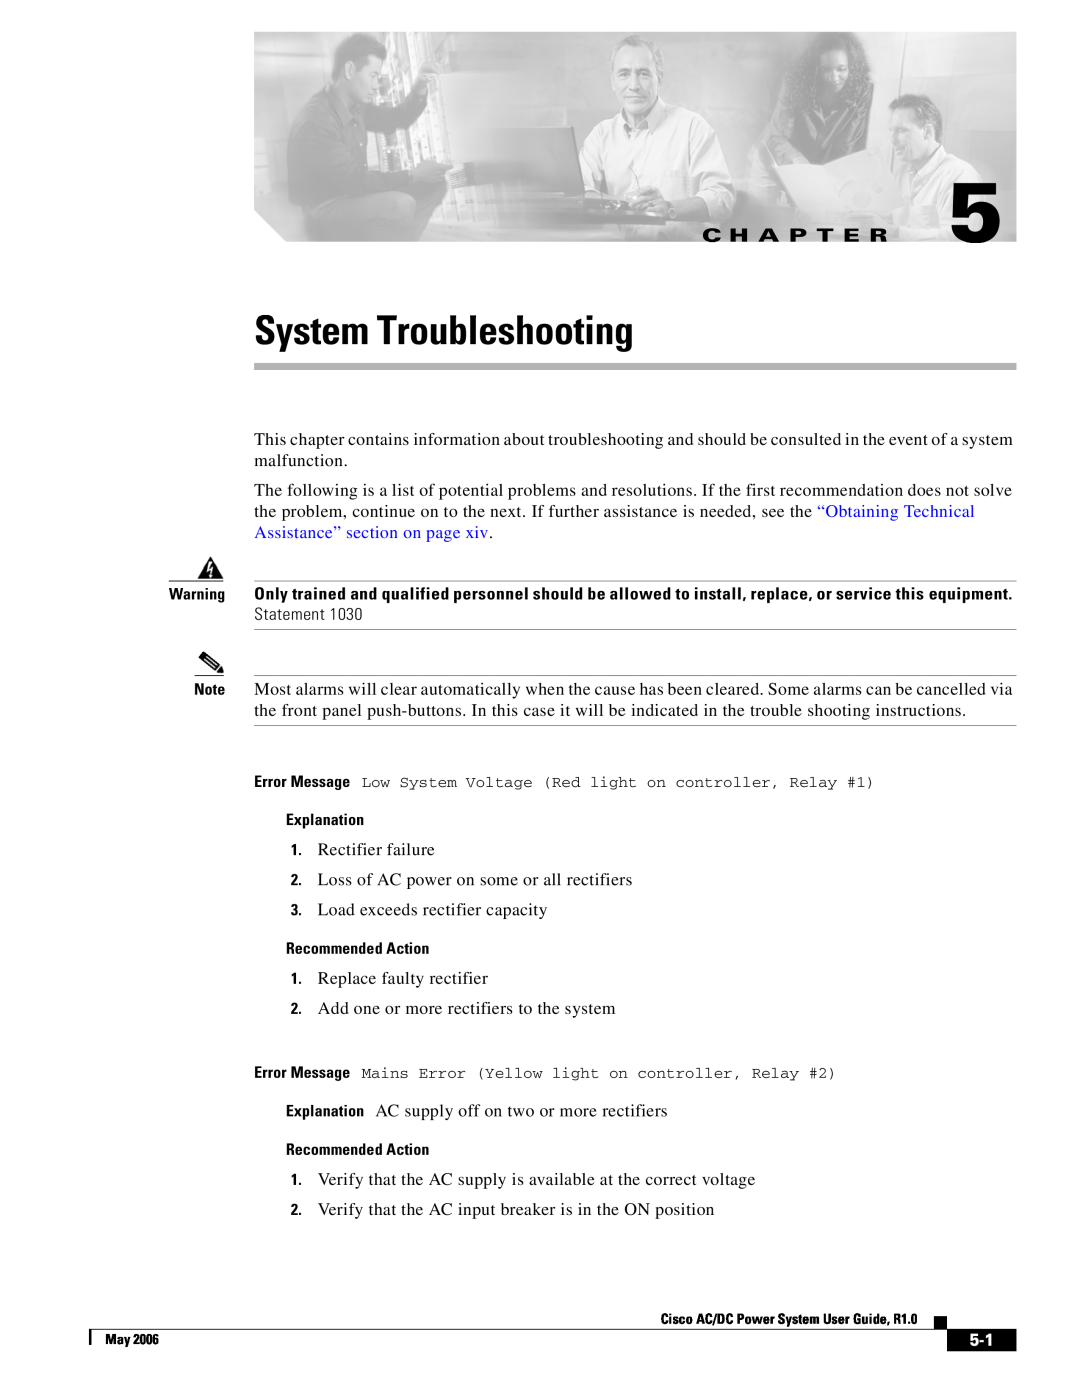 Cisco Systems 124778, 124792, 159330 manual System Troubleshooting, C H A P T E R 